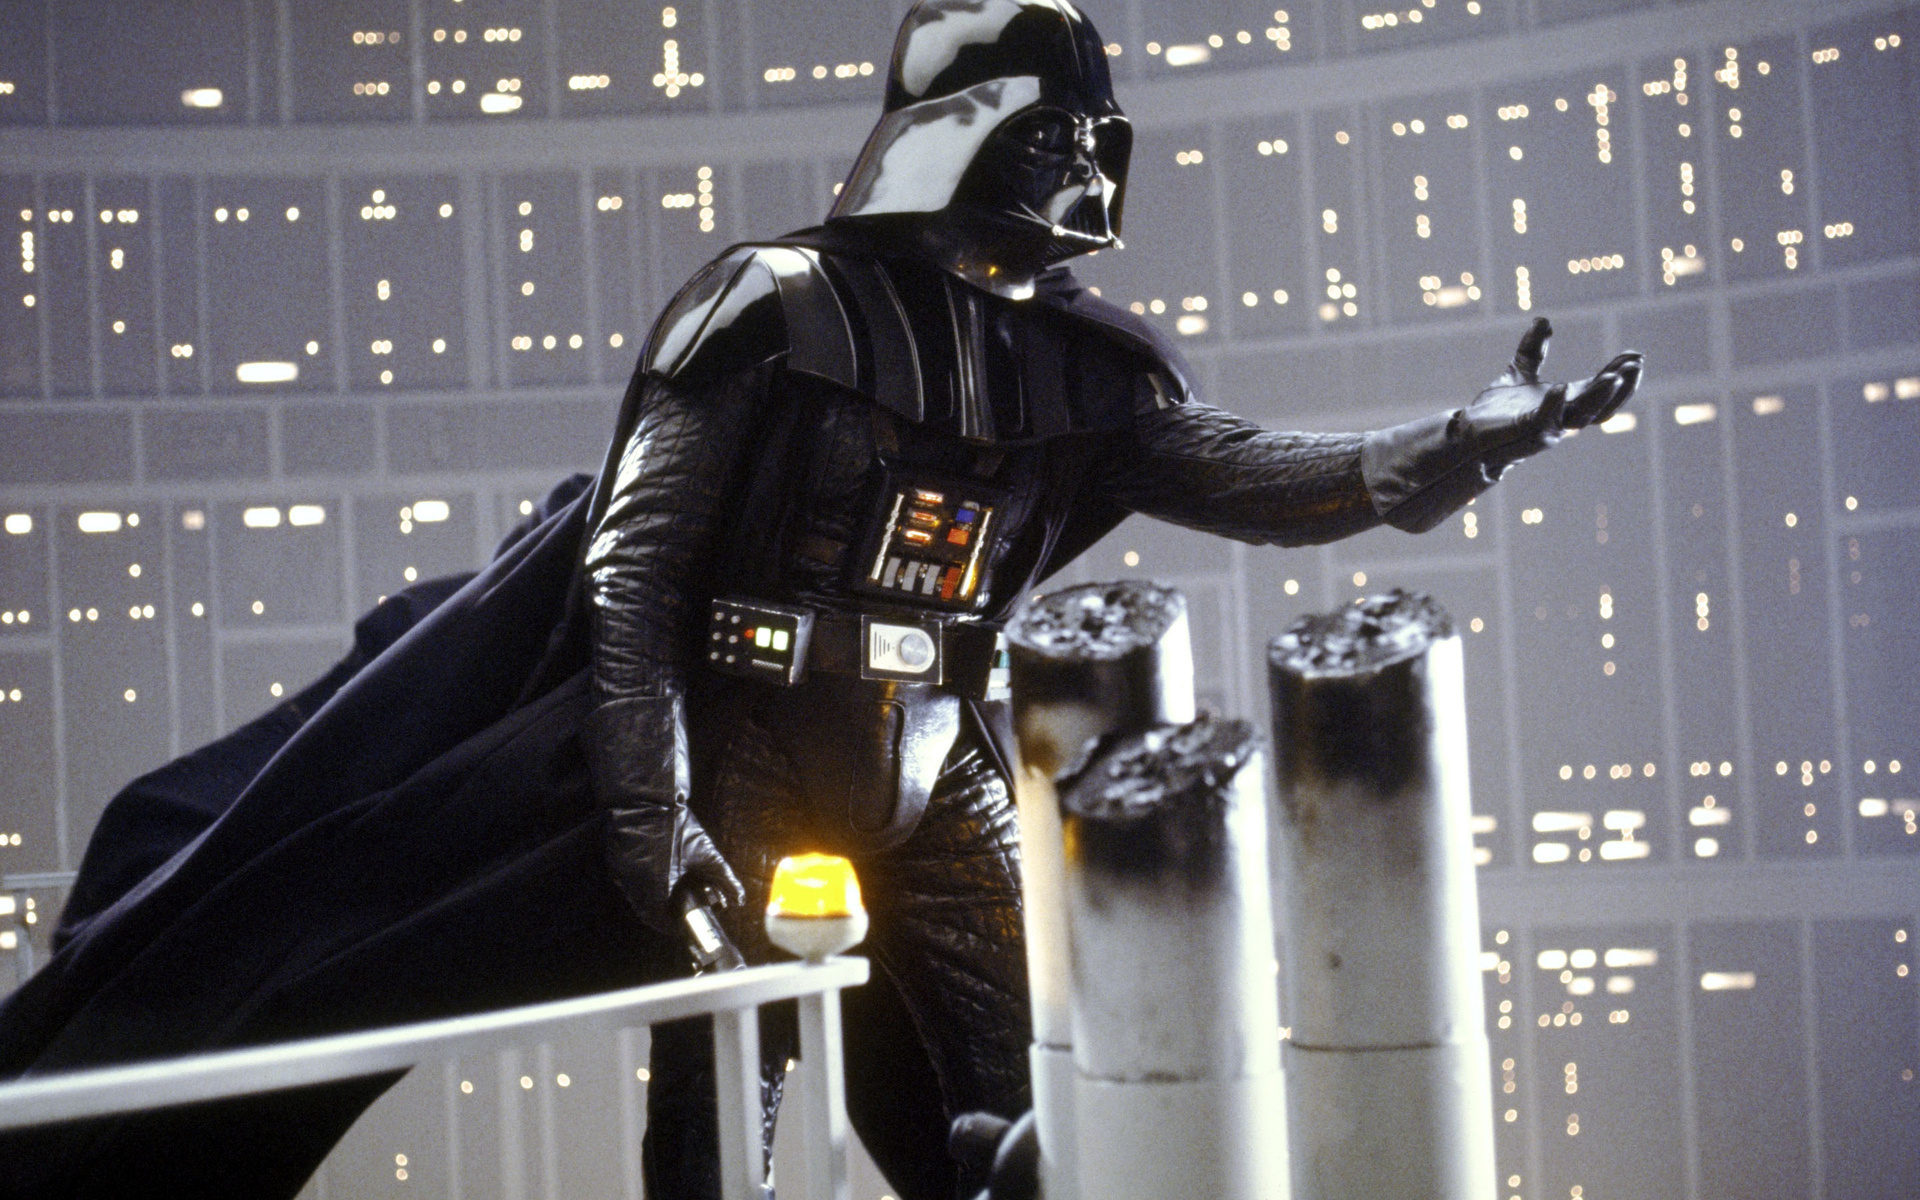 Darth Vader: Star Wars, I am Your Father, Dark Lord of the Sith. 1920x1200 HD Wallpaper.